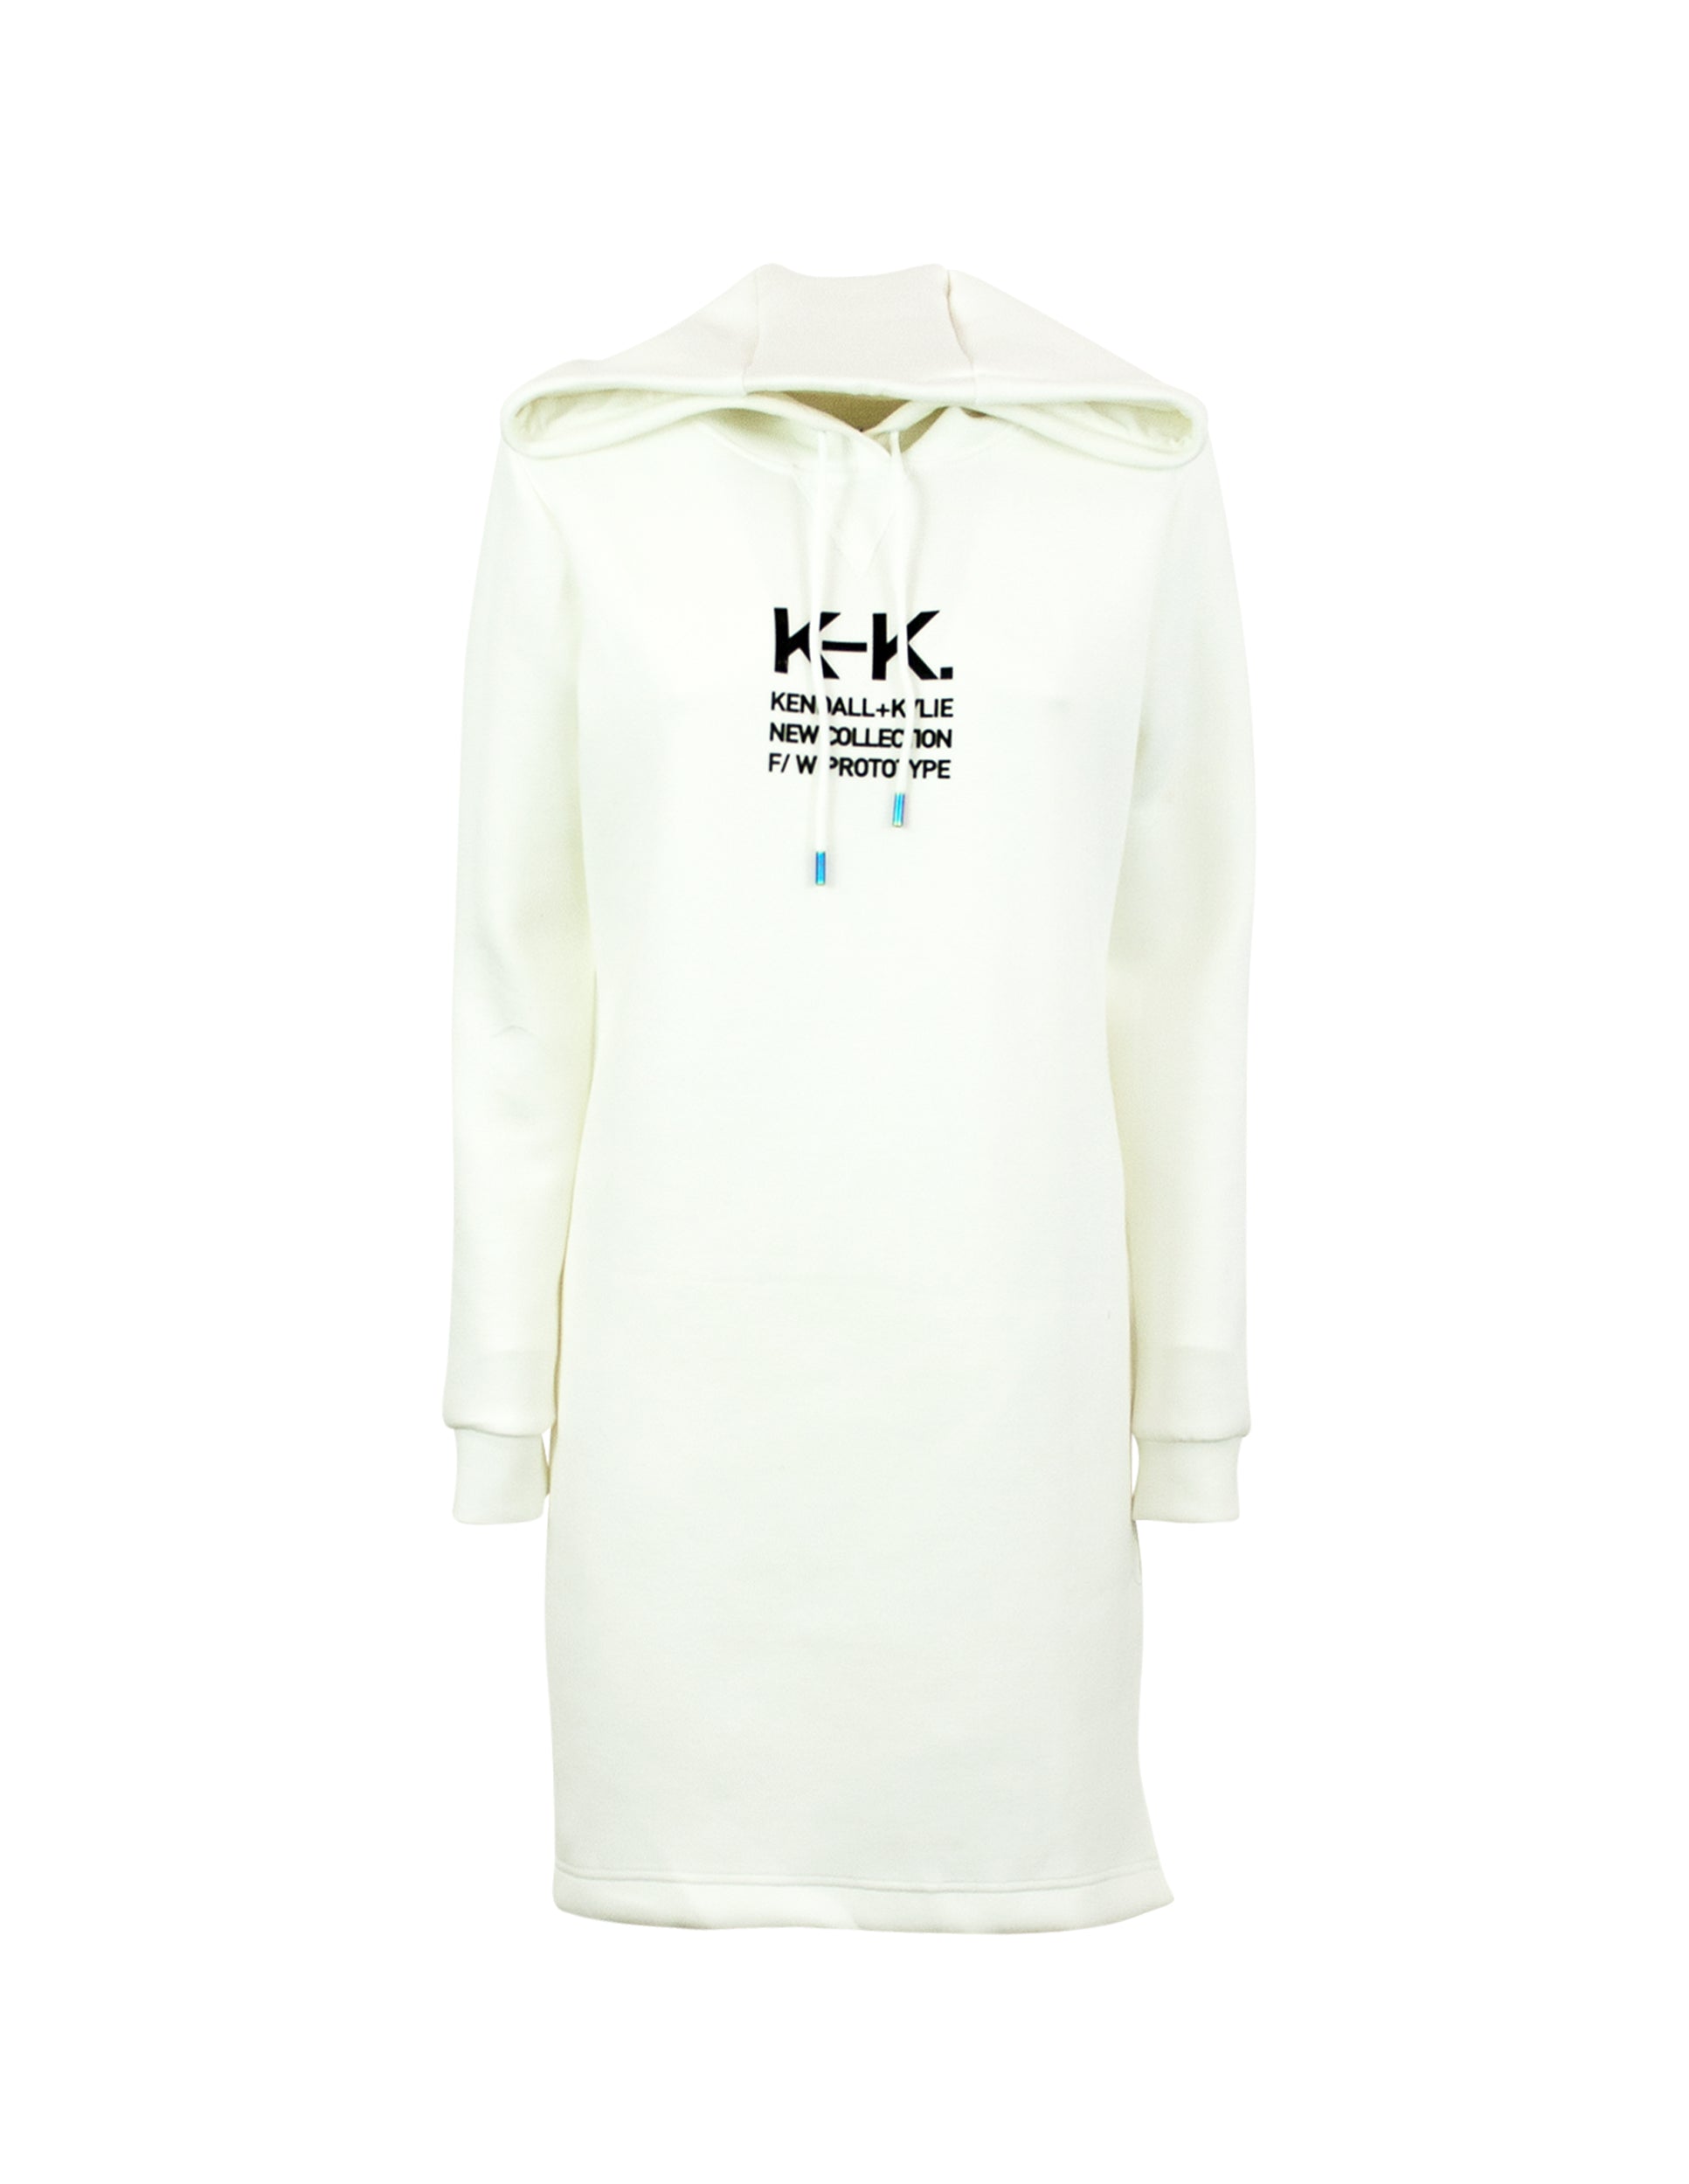 KENDALL AND KYLIE
Long sweatshirt with side slit Kendall + Kylie